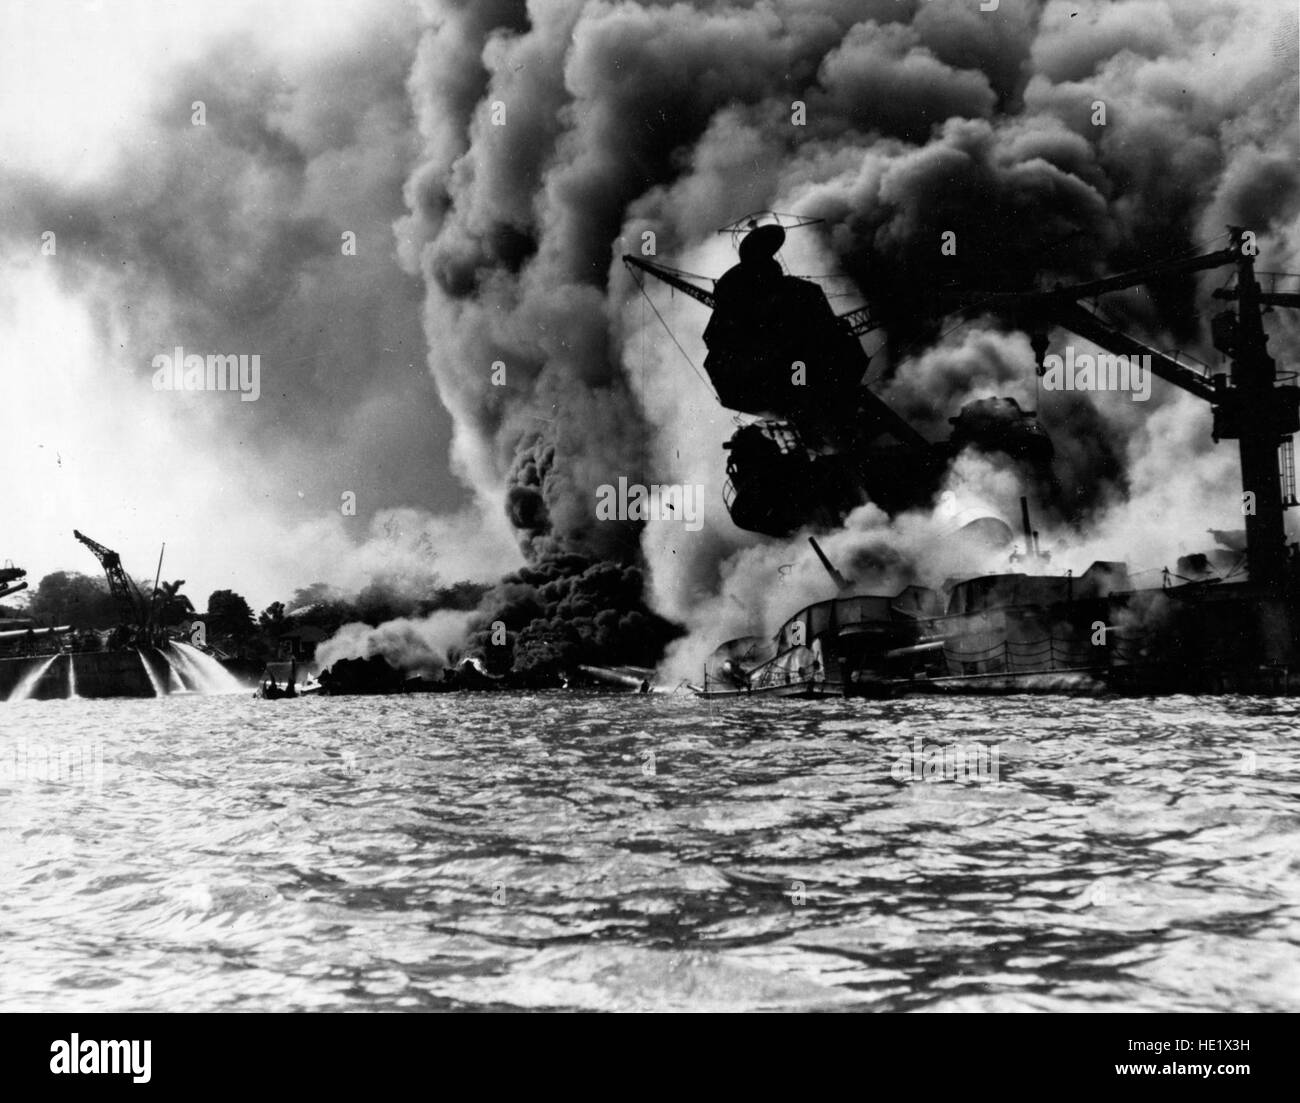 USS Arizona BB-39 sunk and burning furiously, 7 December 1941. Her forward magazines had exploded when she was hit by a Japanese bomb. At left, men on the stern of USS Tennessee BB-43 are playing fire hoses on the water to force burning oil away from their ship Official U.S. Navy Photograph, now in the collections of the National Archives. Stock Photo